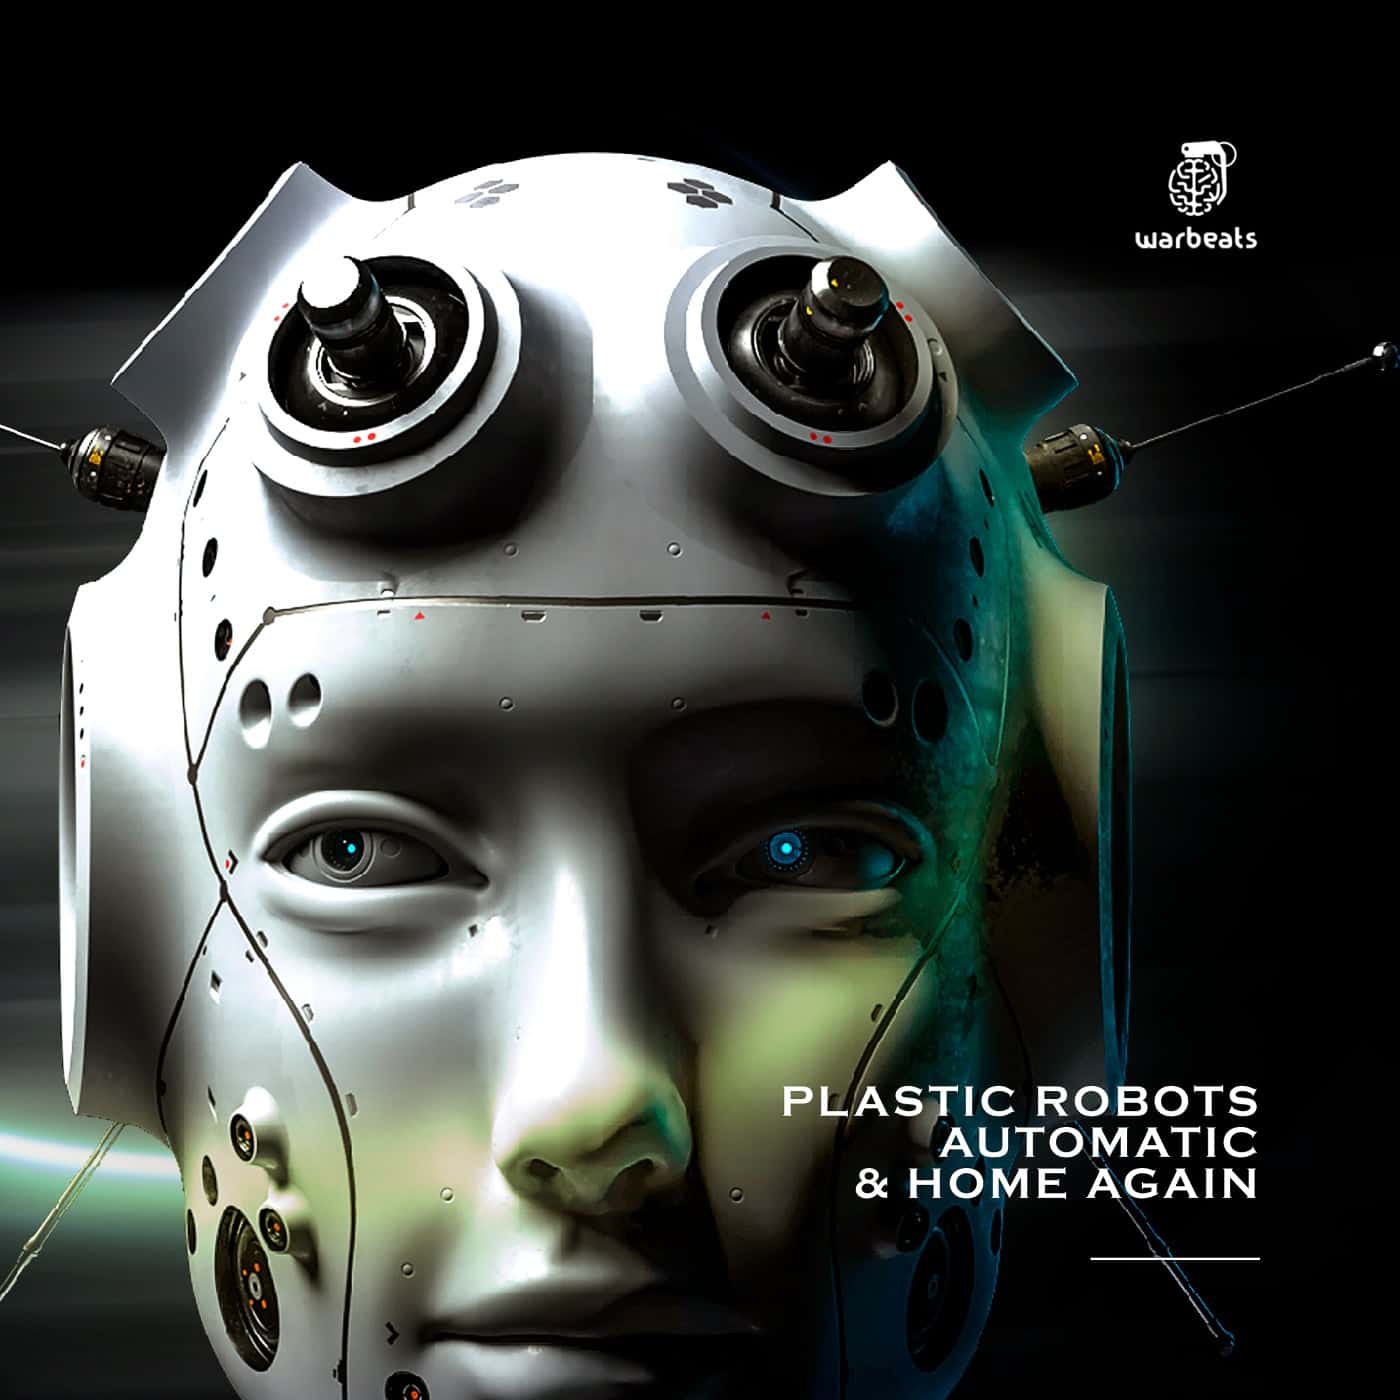 image cover: Plastic Robots - Automatic & Home Again / WAR105